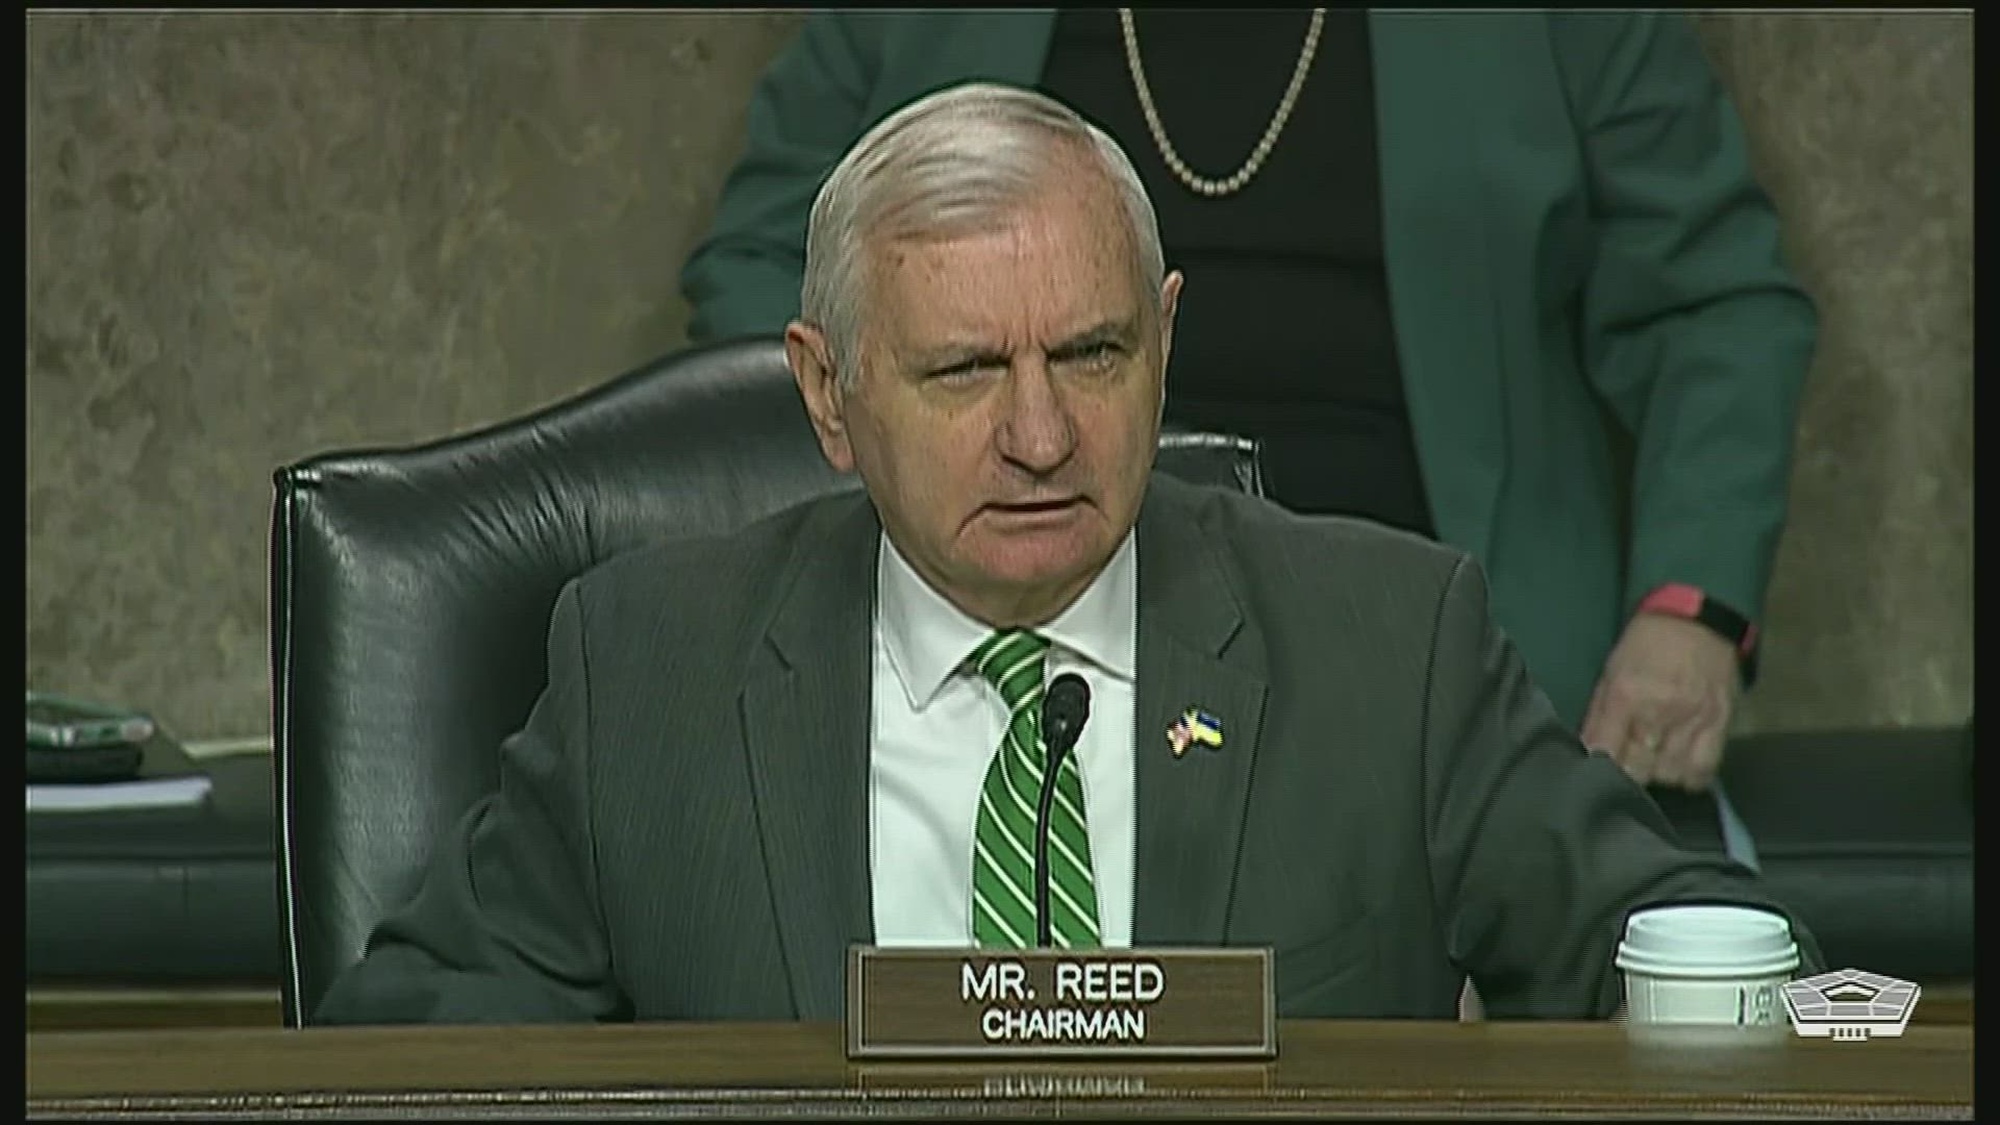 Secretary of Defense Lloyd J. Austin III testifies about the Defense Department’s Defense Authorization Request for Fiscal Year 2023 and the Future Years Defense Program. Other witnesses include Mike McCord, undersecretary of defense (comptroller) and chief financial officer, and Army Gen. Mark A. Milley, chairman of the Joint Chiefs of Staff.